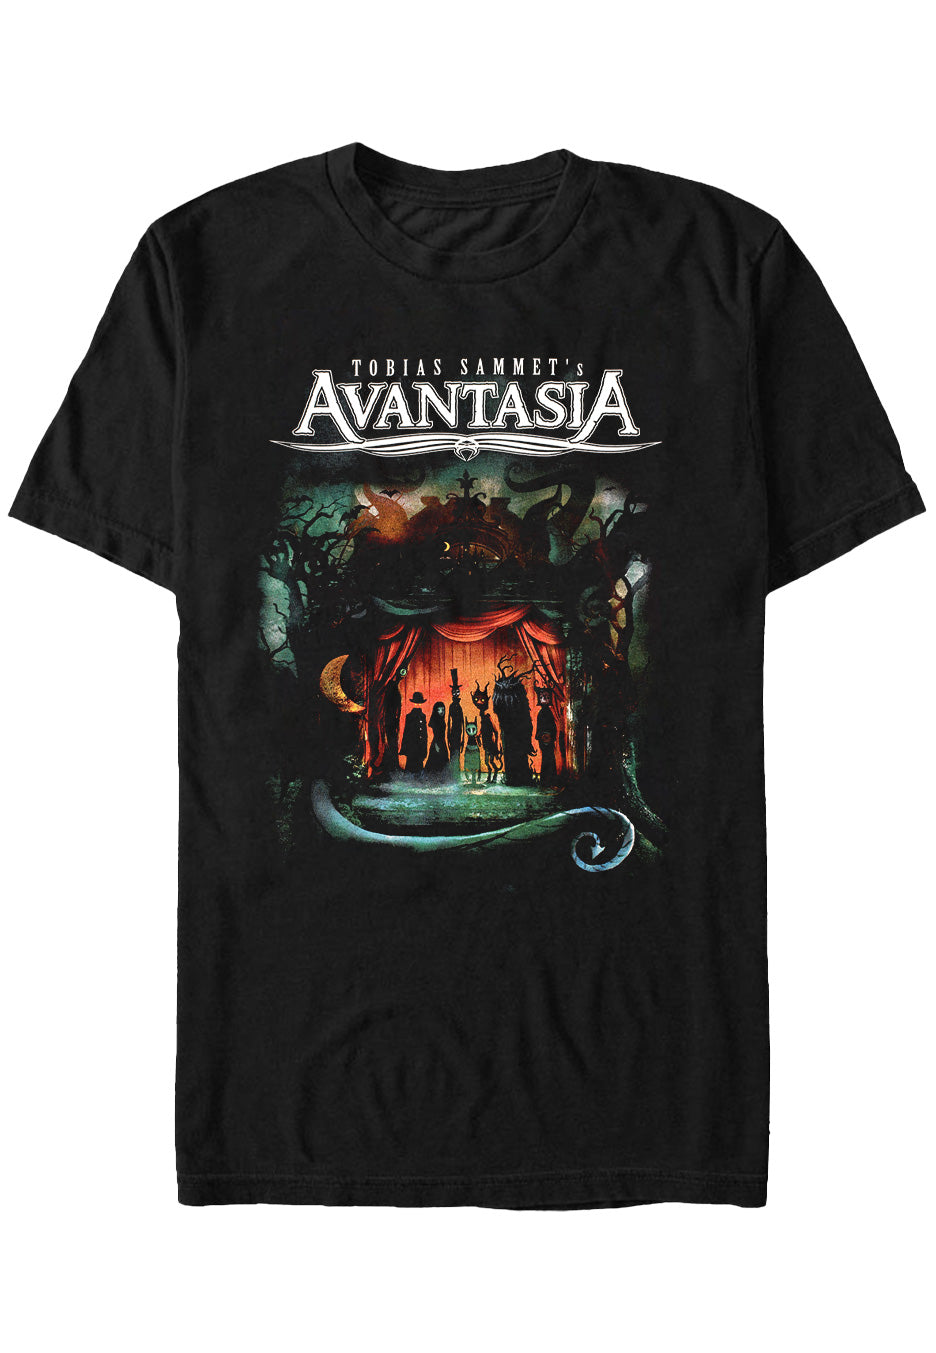 Avantasia - A Paranormal Evening With The Moonflower Society Cover - T-Shirt